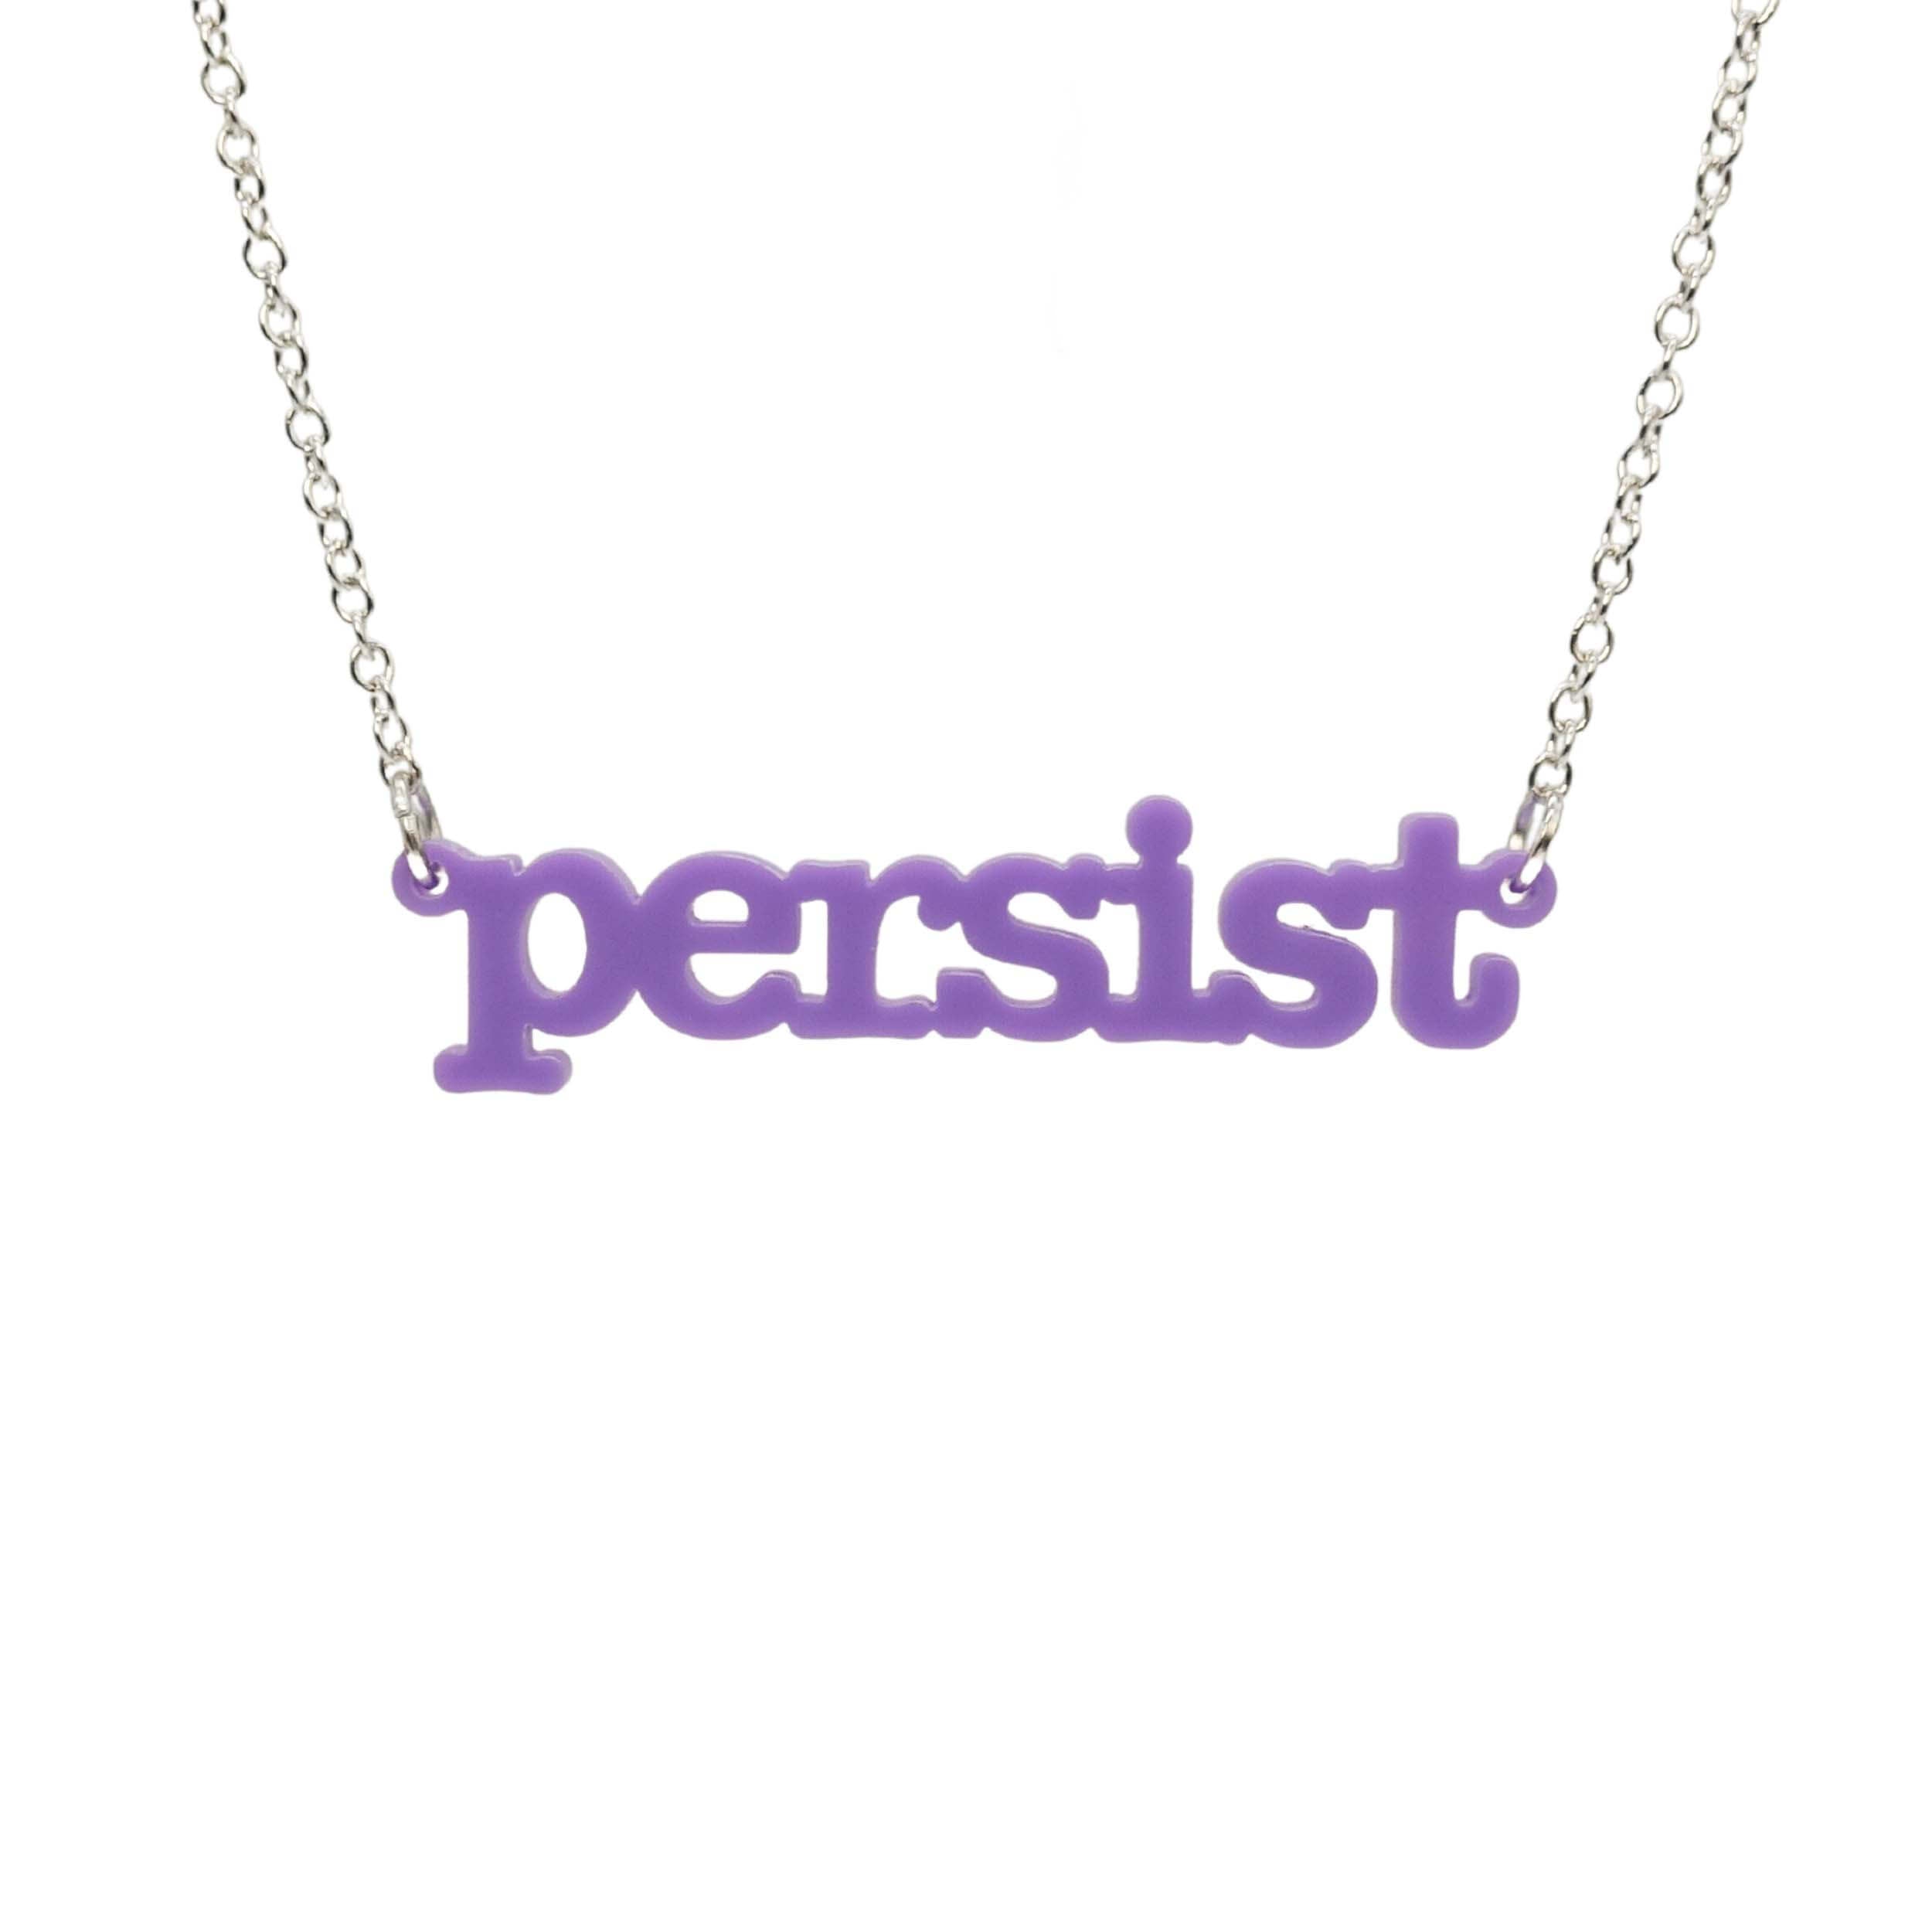 Parma violet Persist necklace in typewriter font hanging on a silver chain against a white background. 